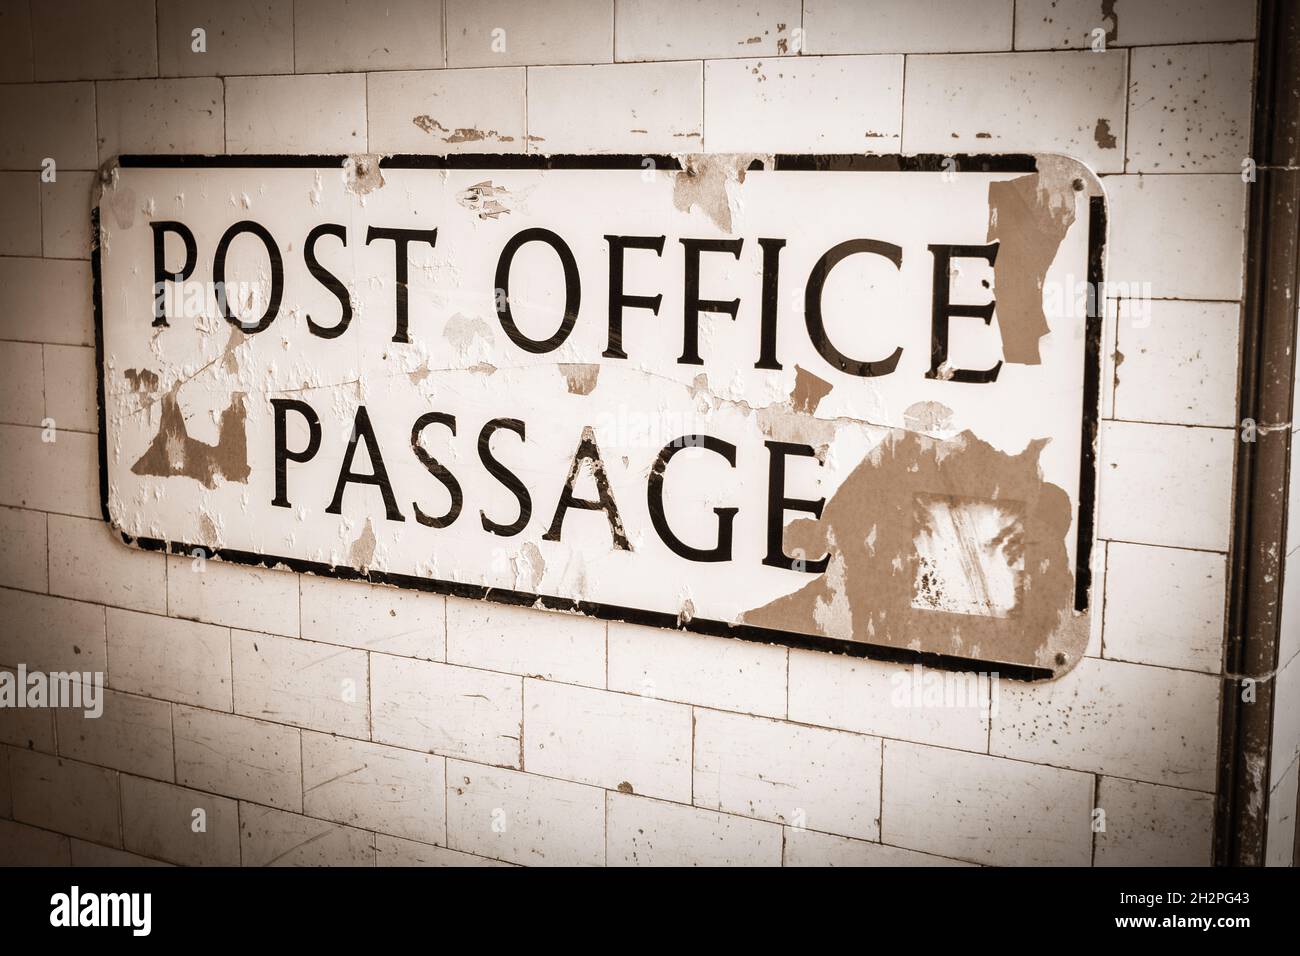 Post Office Passage Hastings in a golden sepia tone Stock Photo